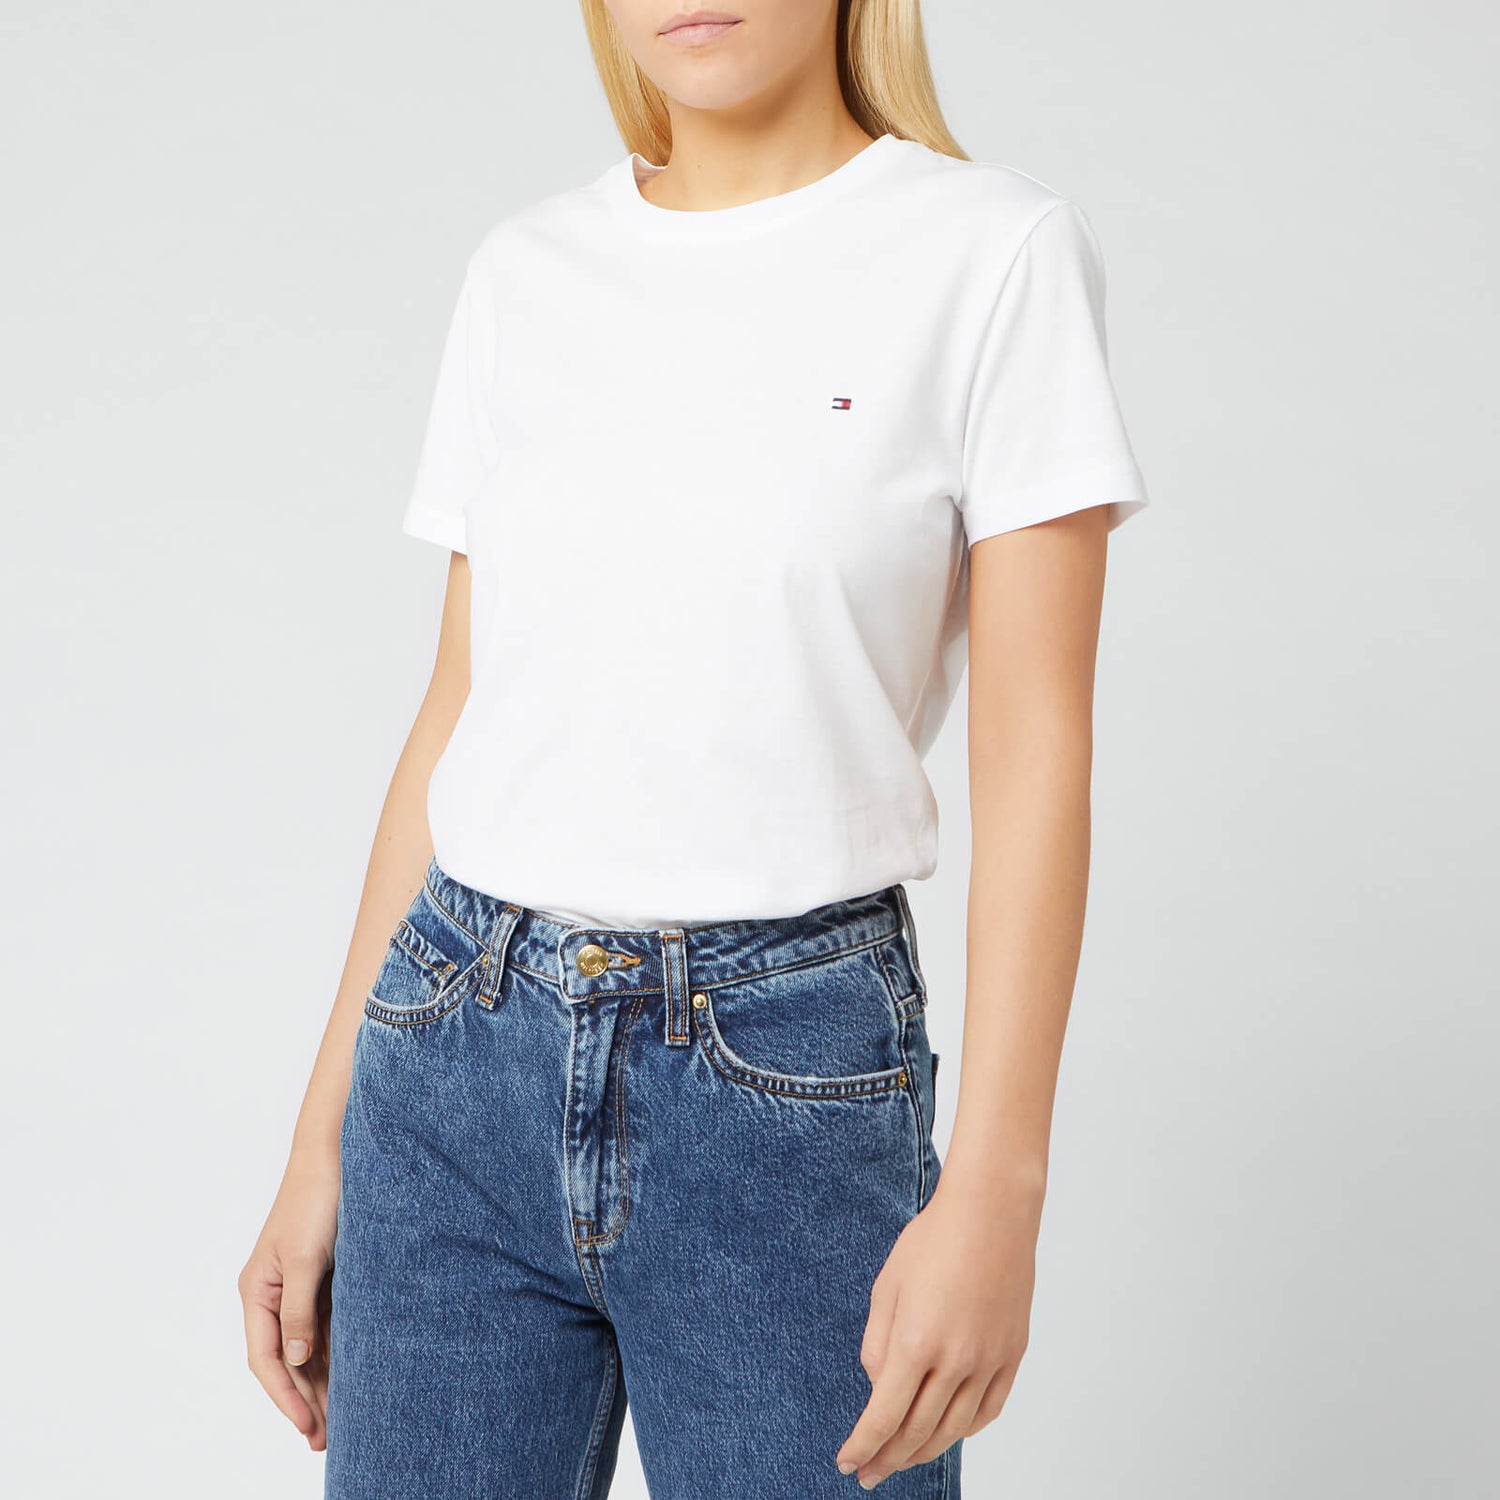 Tommy Hilfiger Women's Heritage Crew Neck T-Shirt - Classic White